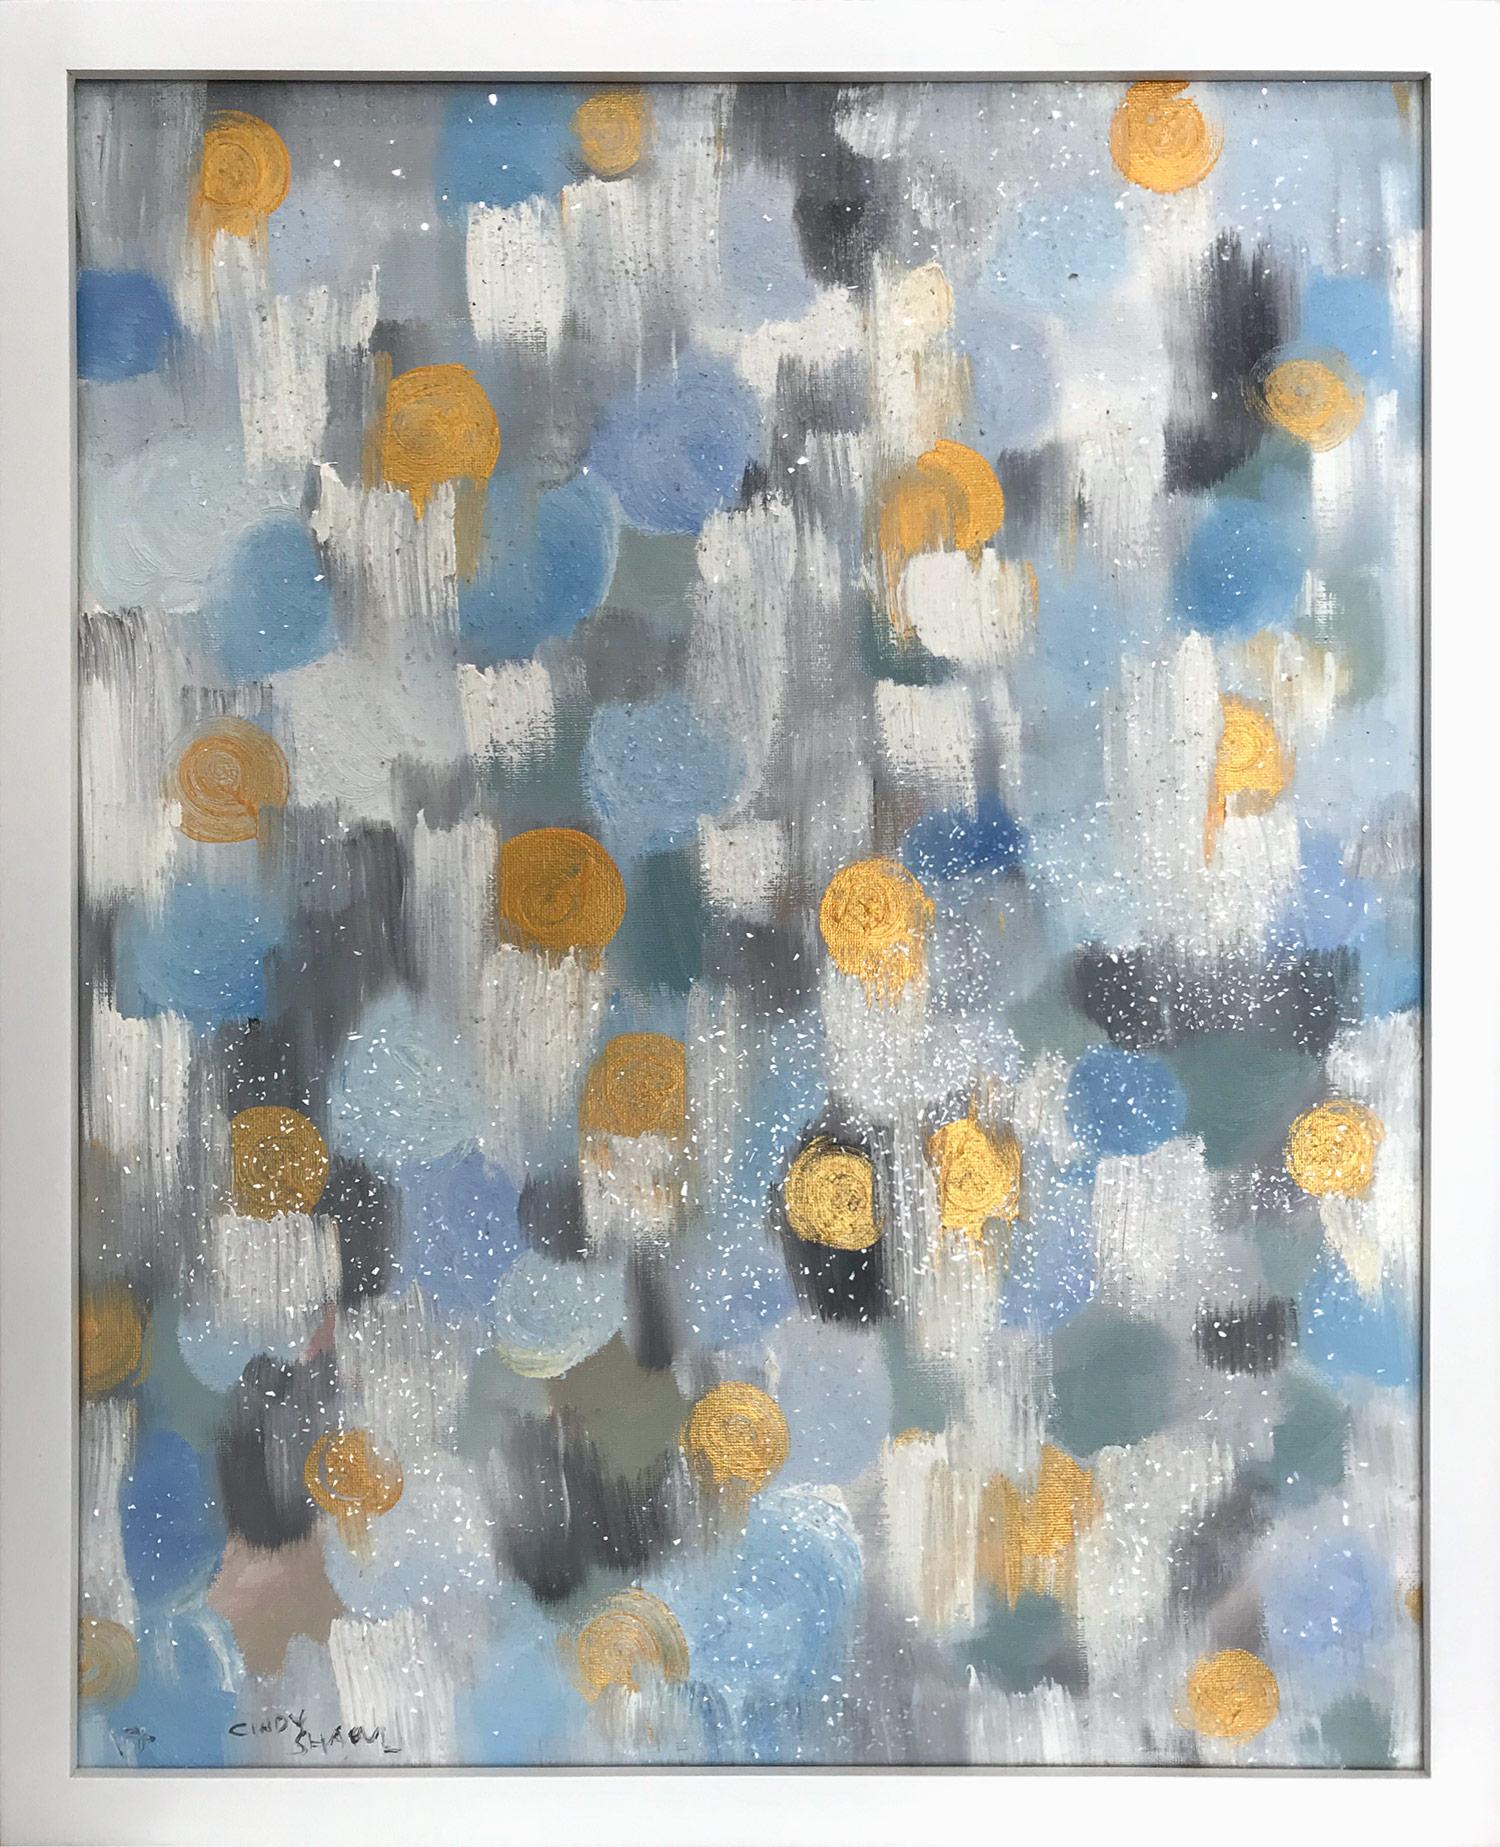 Cindy Shaoul Abstract Painting - "Dripping Dots - Periwinkle & Gold" Colorful Contemporary Oil Painting on Canvas